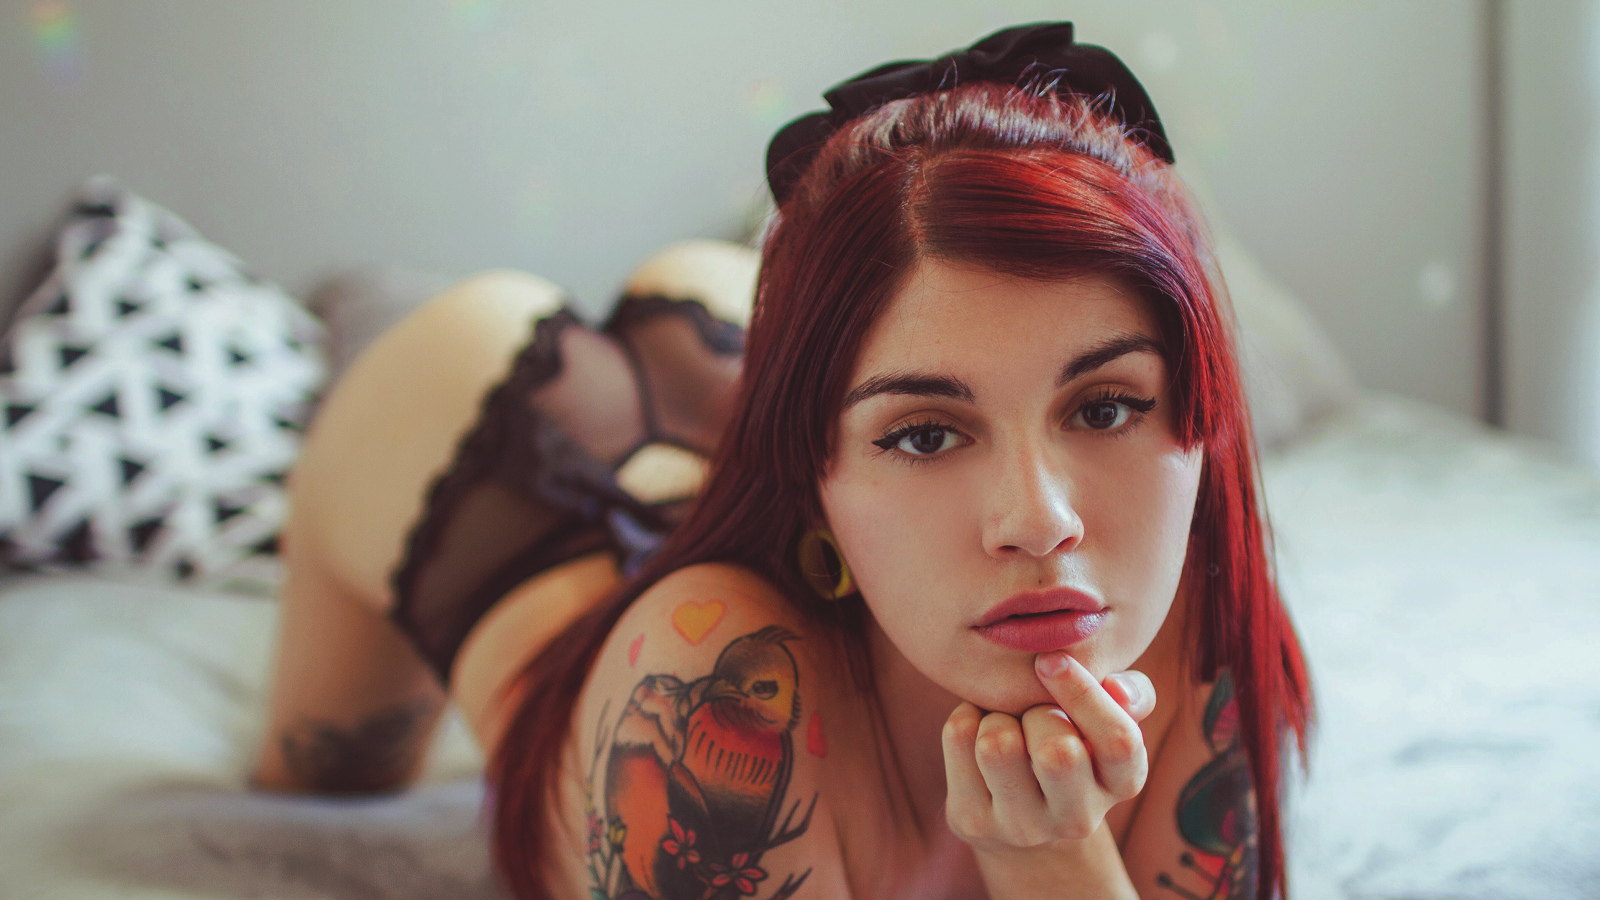 People 1600x900 Almendra Suicide women Suicide Girls in bed rear view dyed hair black lingerie tattoo